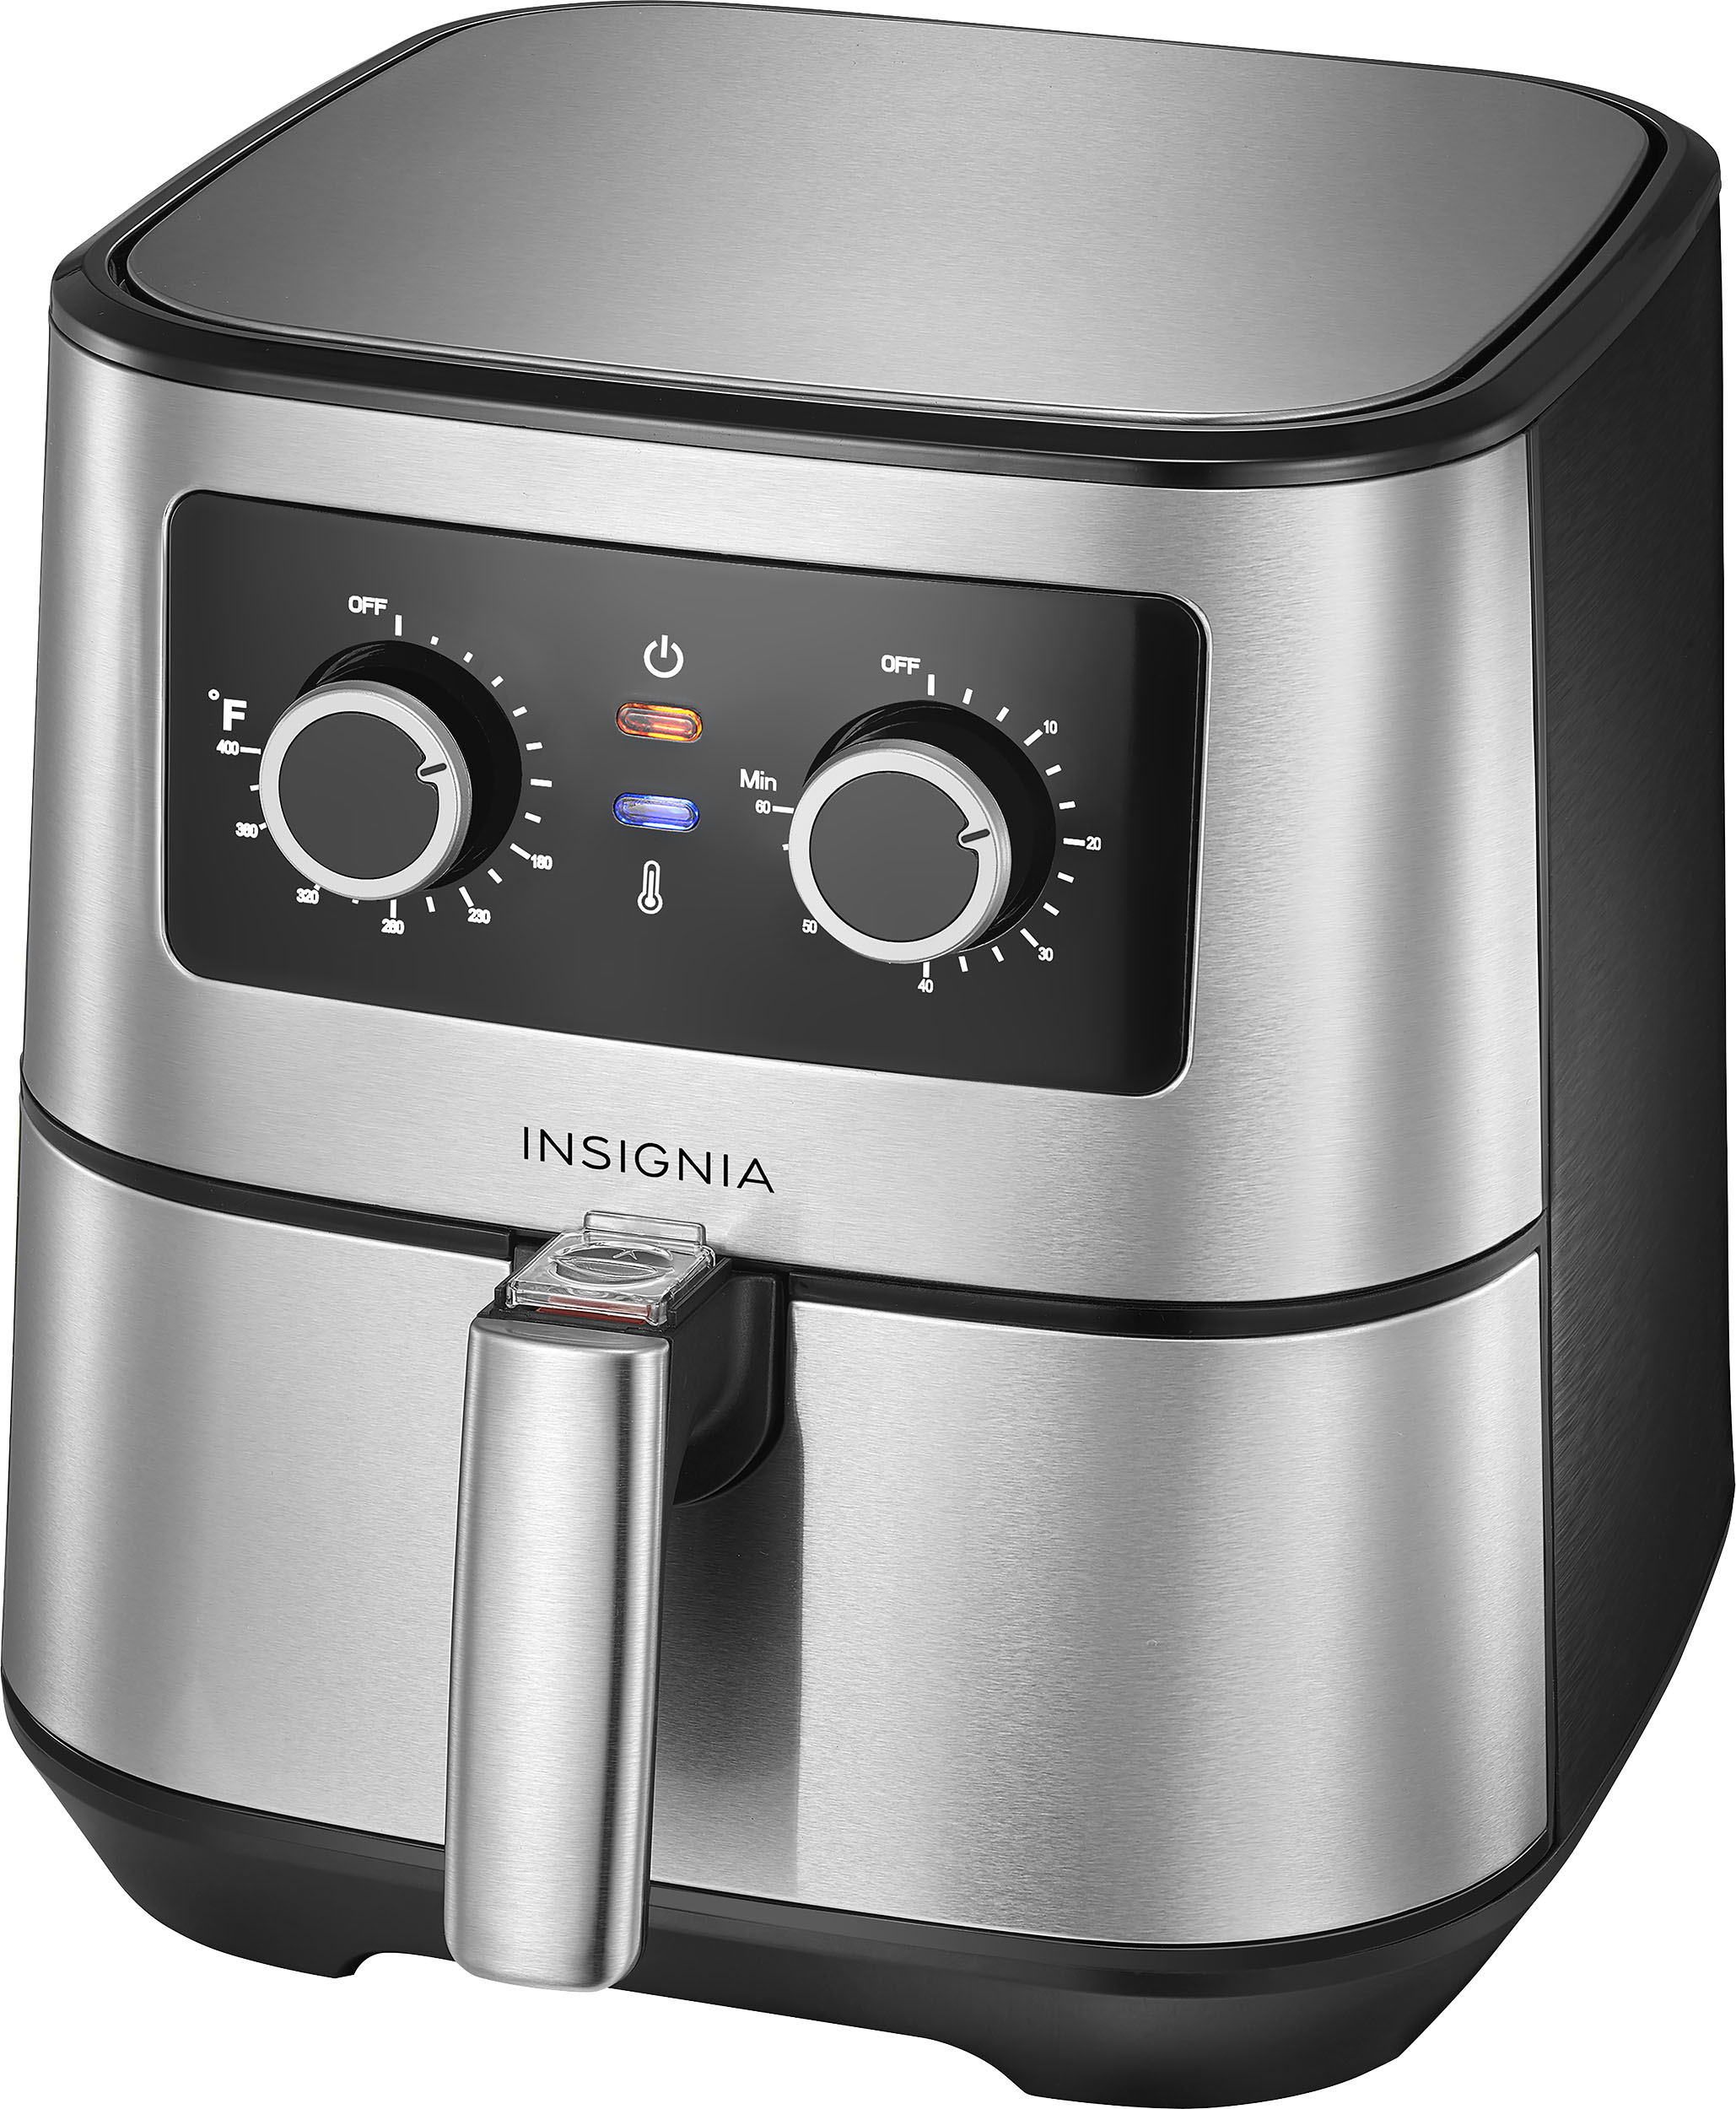 Insignia's family-sized 10-Qt. Air Fryer Oven receives $80 price drop, now  $50 shipped